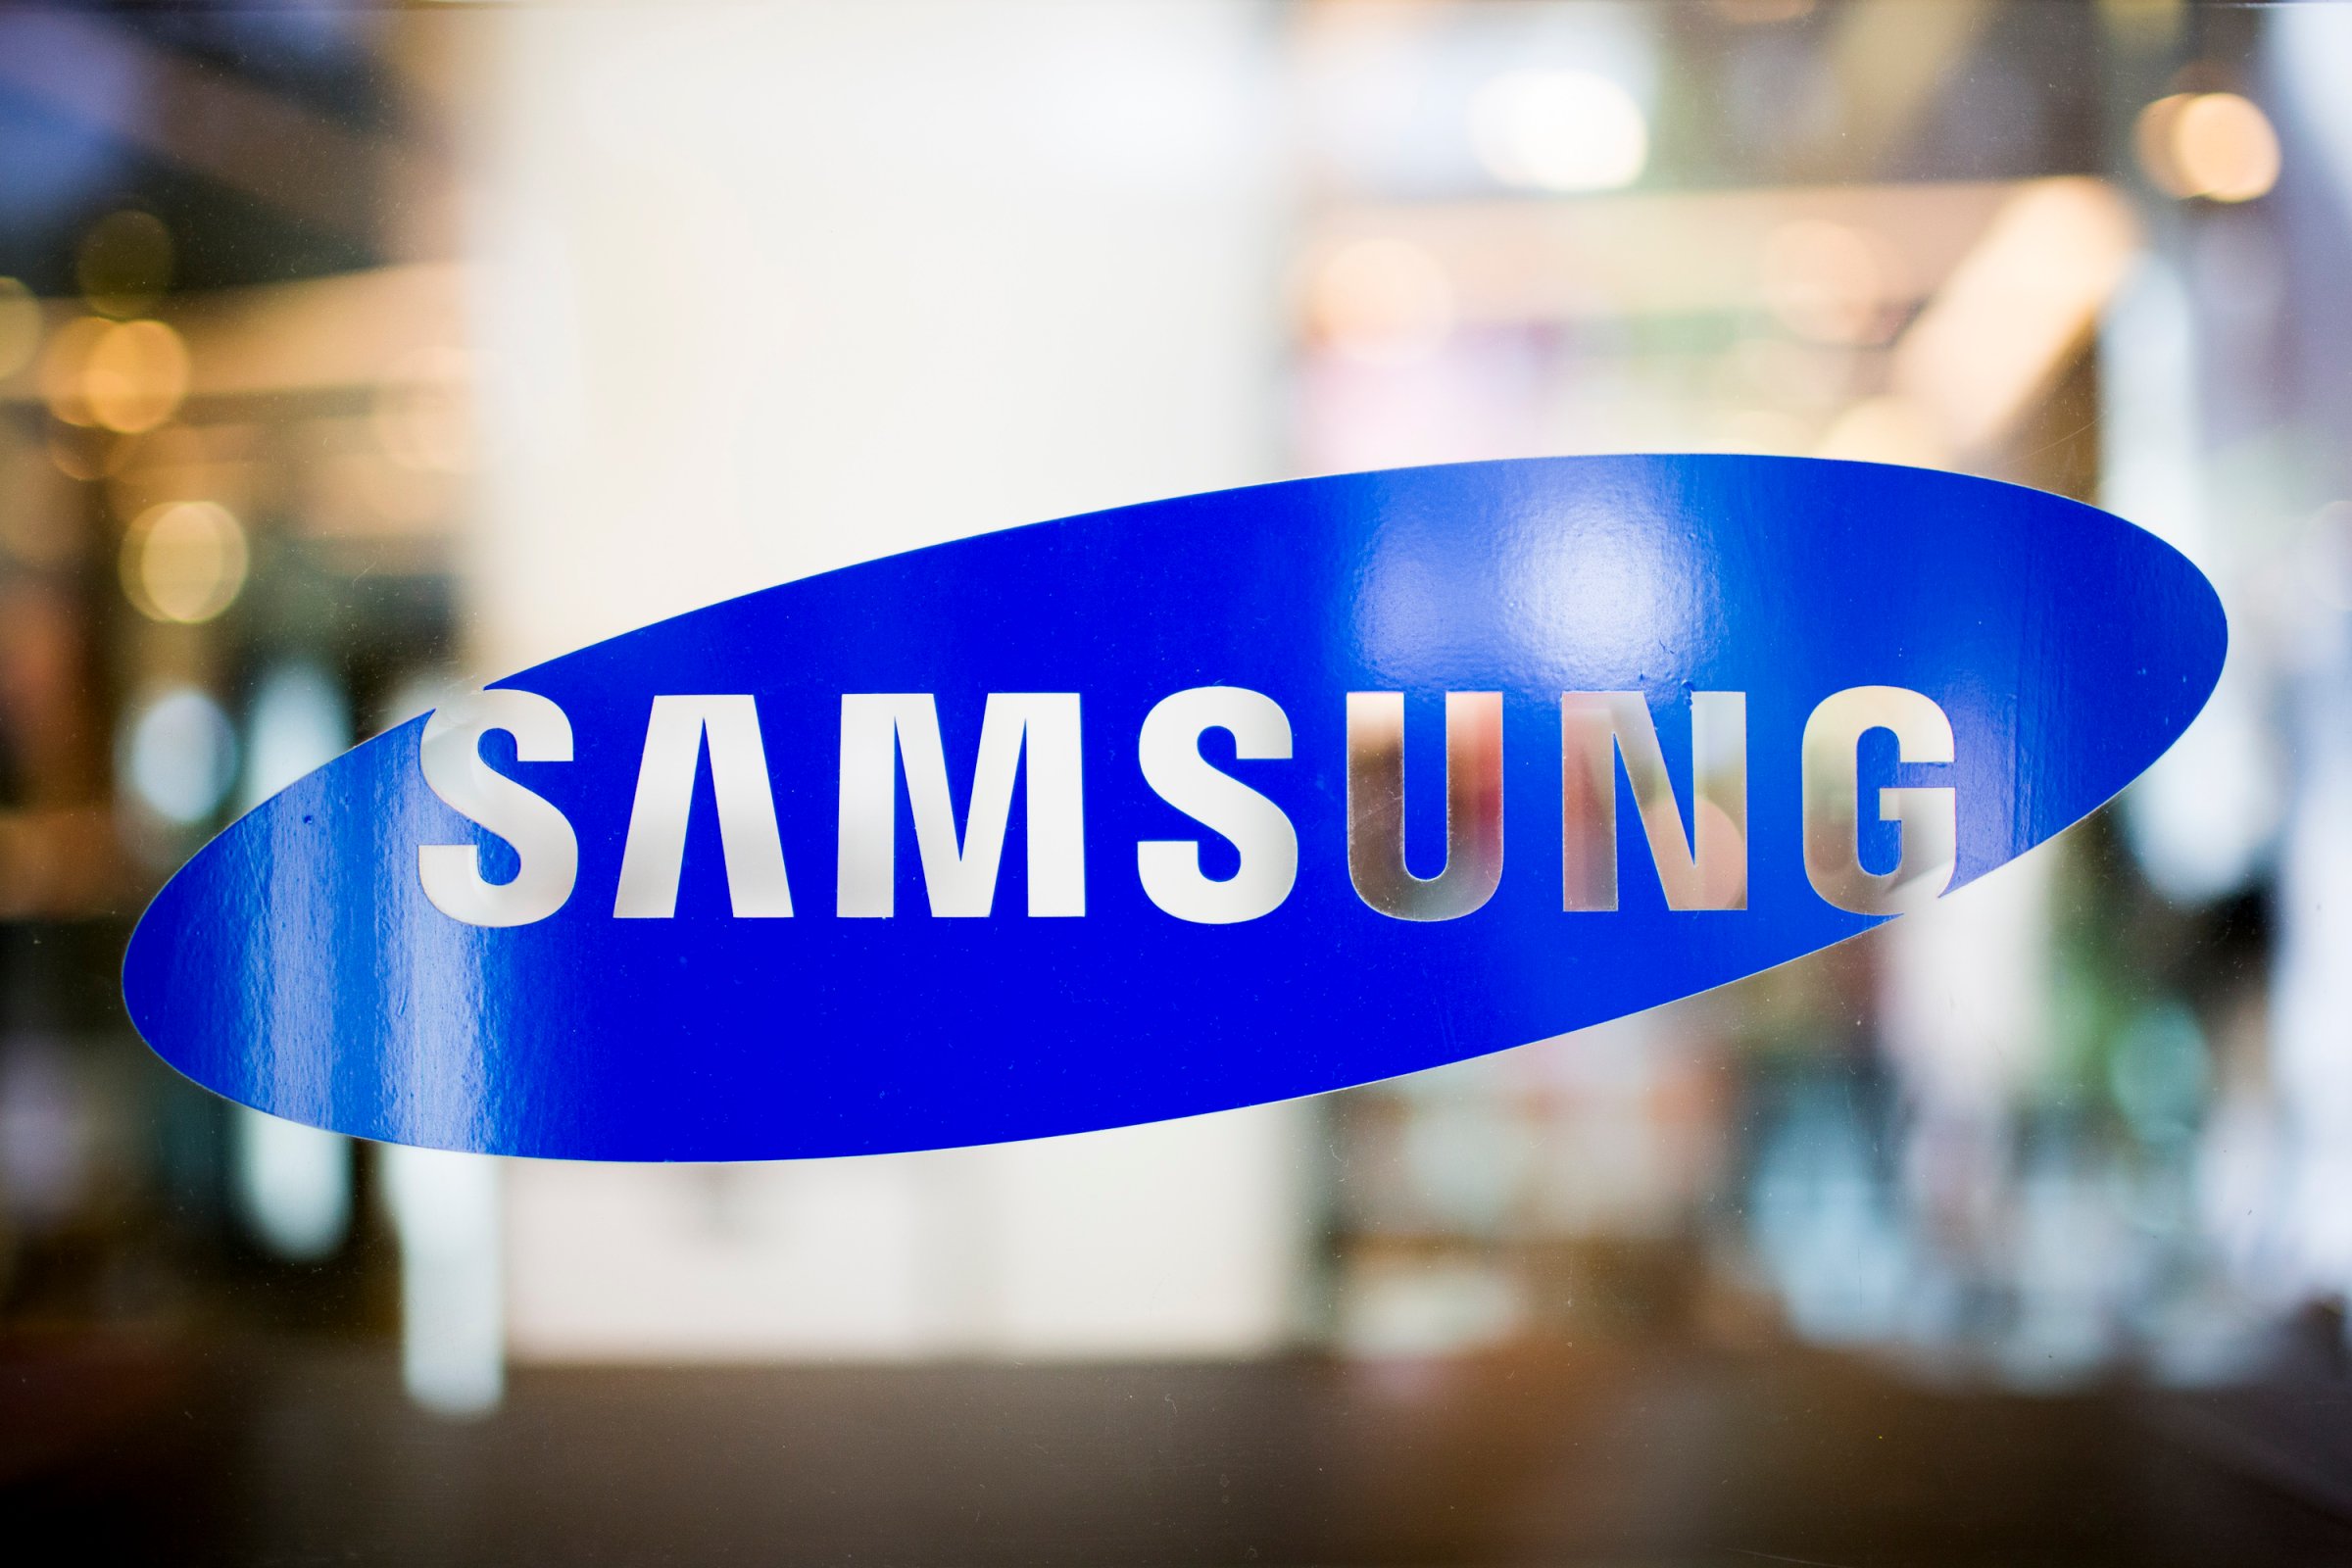 The Samsung Electronics Co. logo is displayed at a store in Bangkok, Thailand, on Thursday, Oct. 4, 2012.